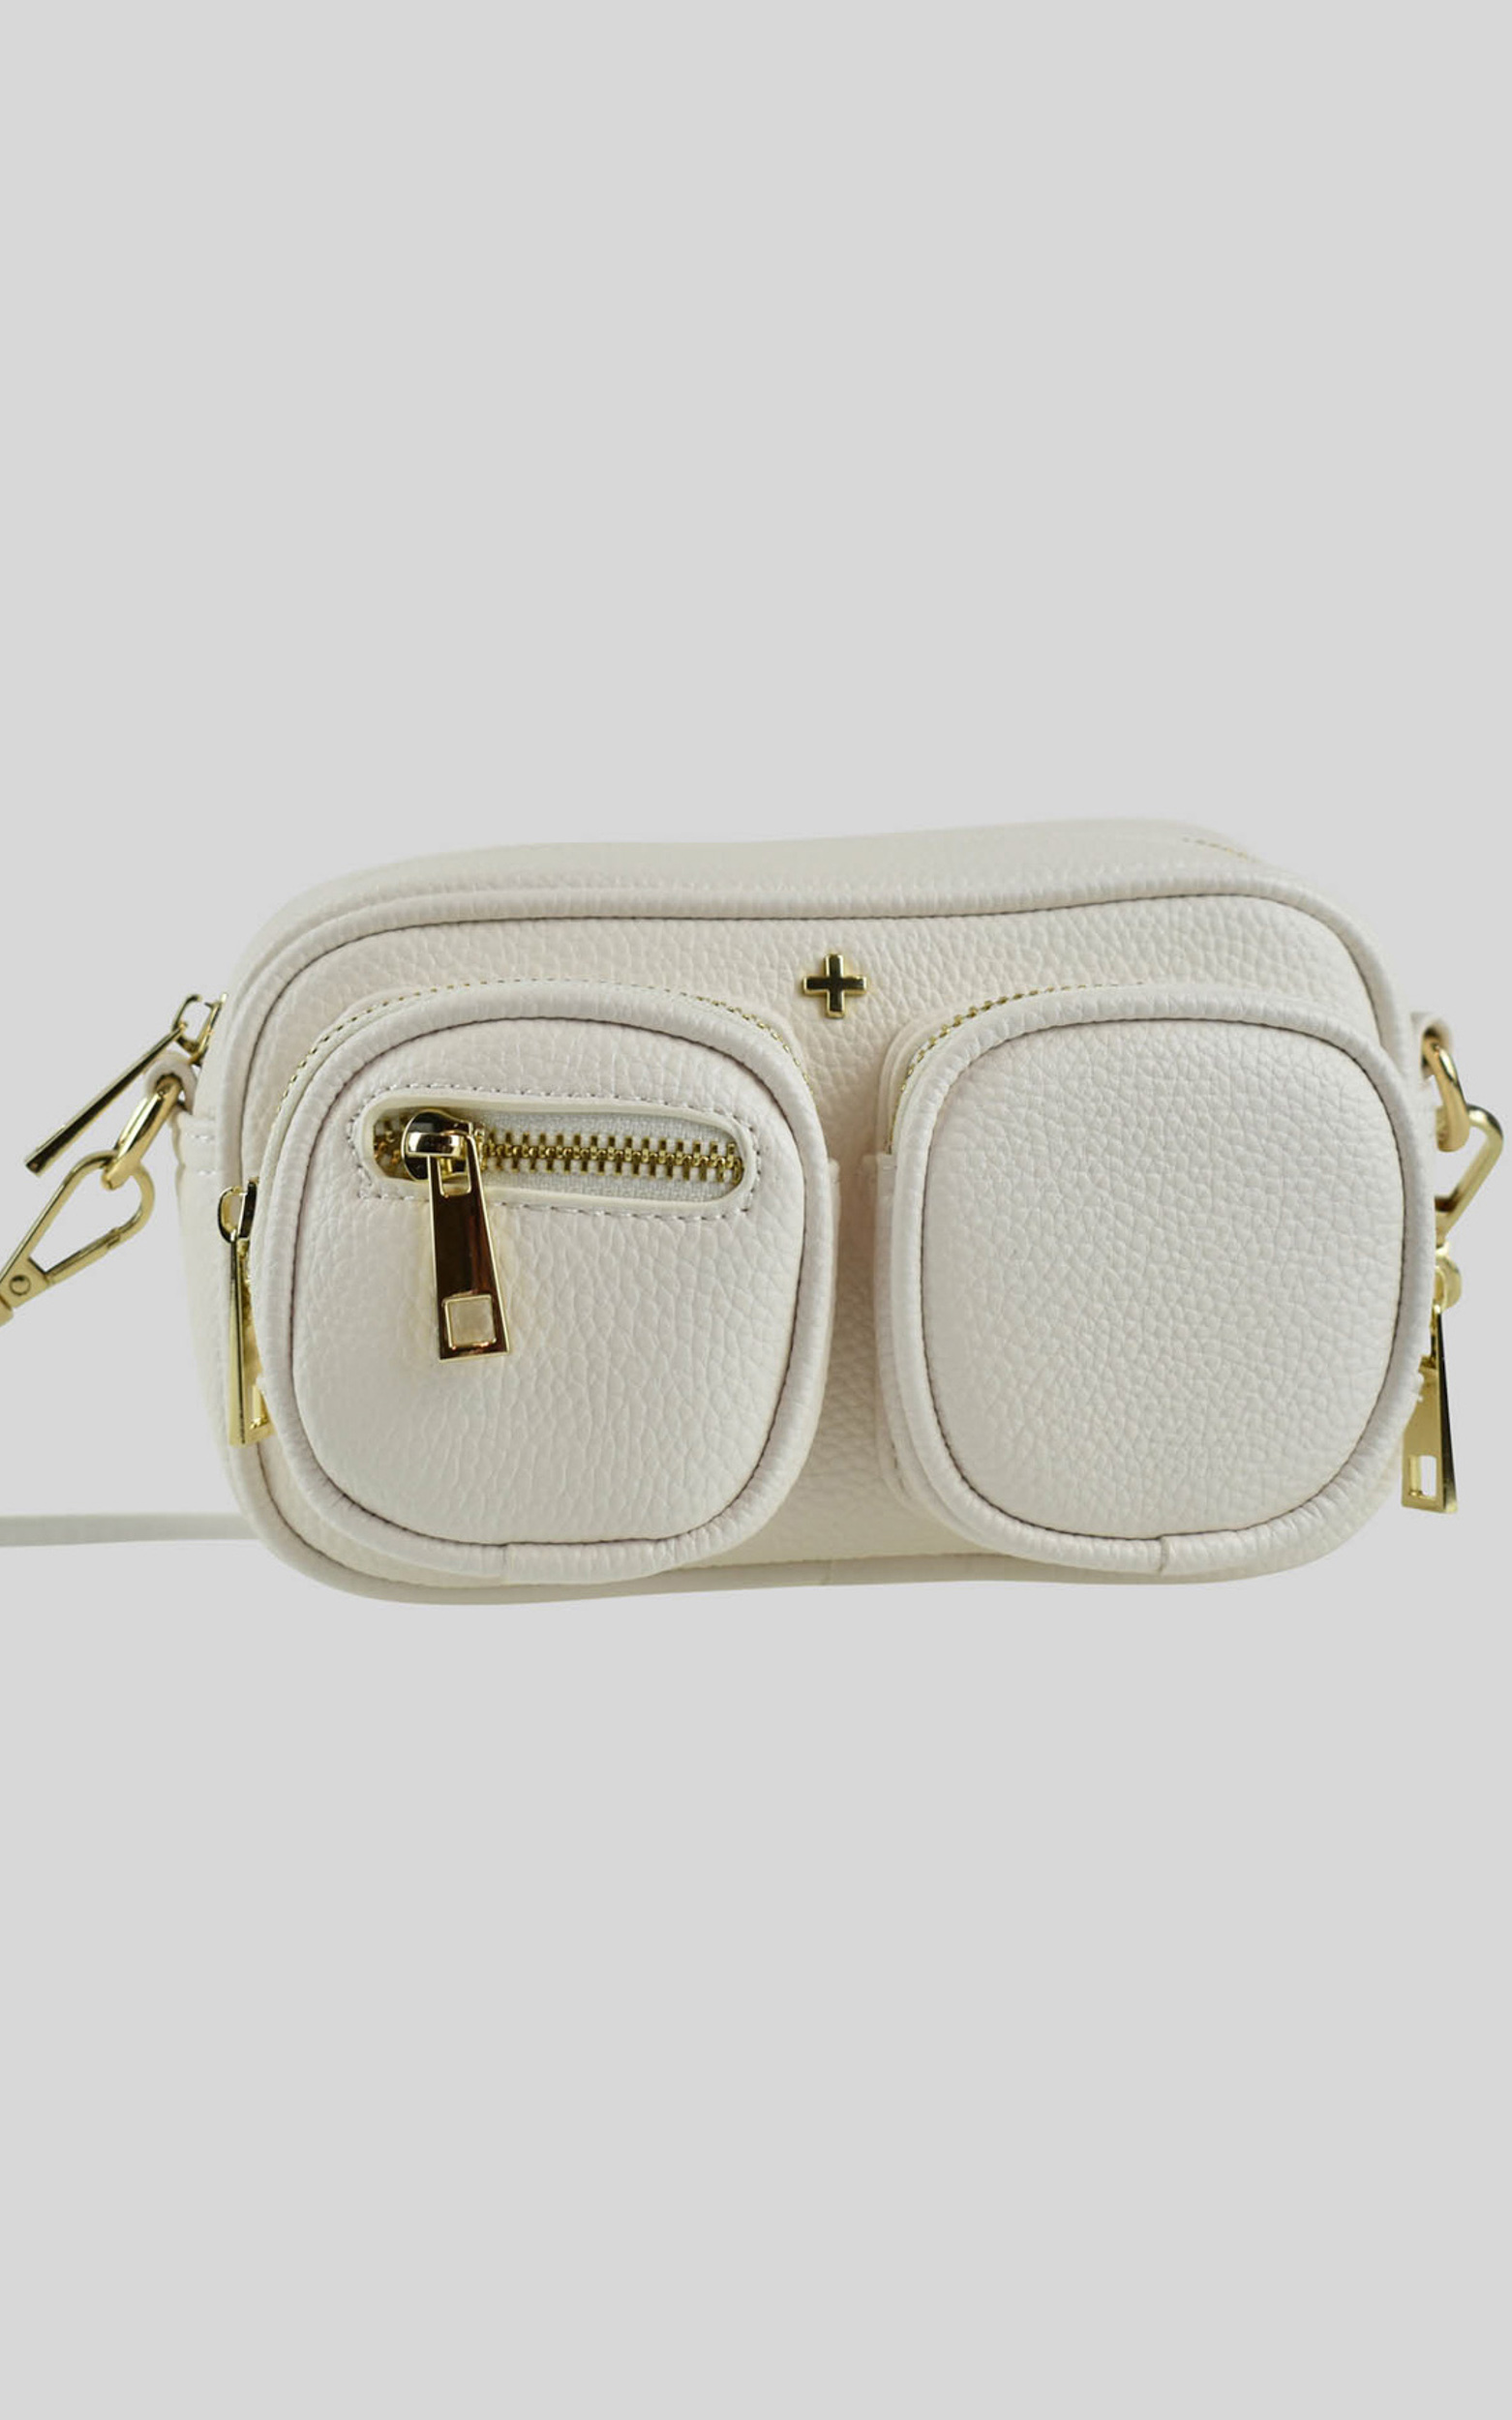 Peta And Jain - Lala Bag in White PU - NoSize, WHT1, hi-res image number null